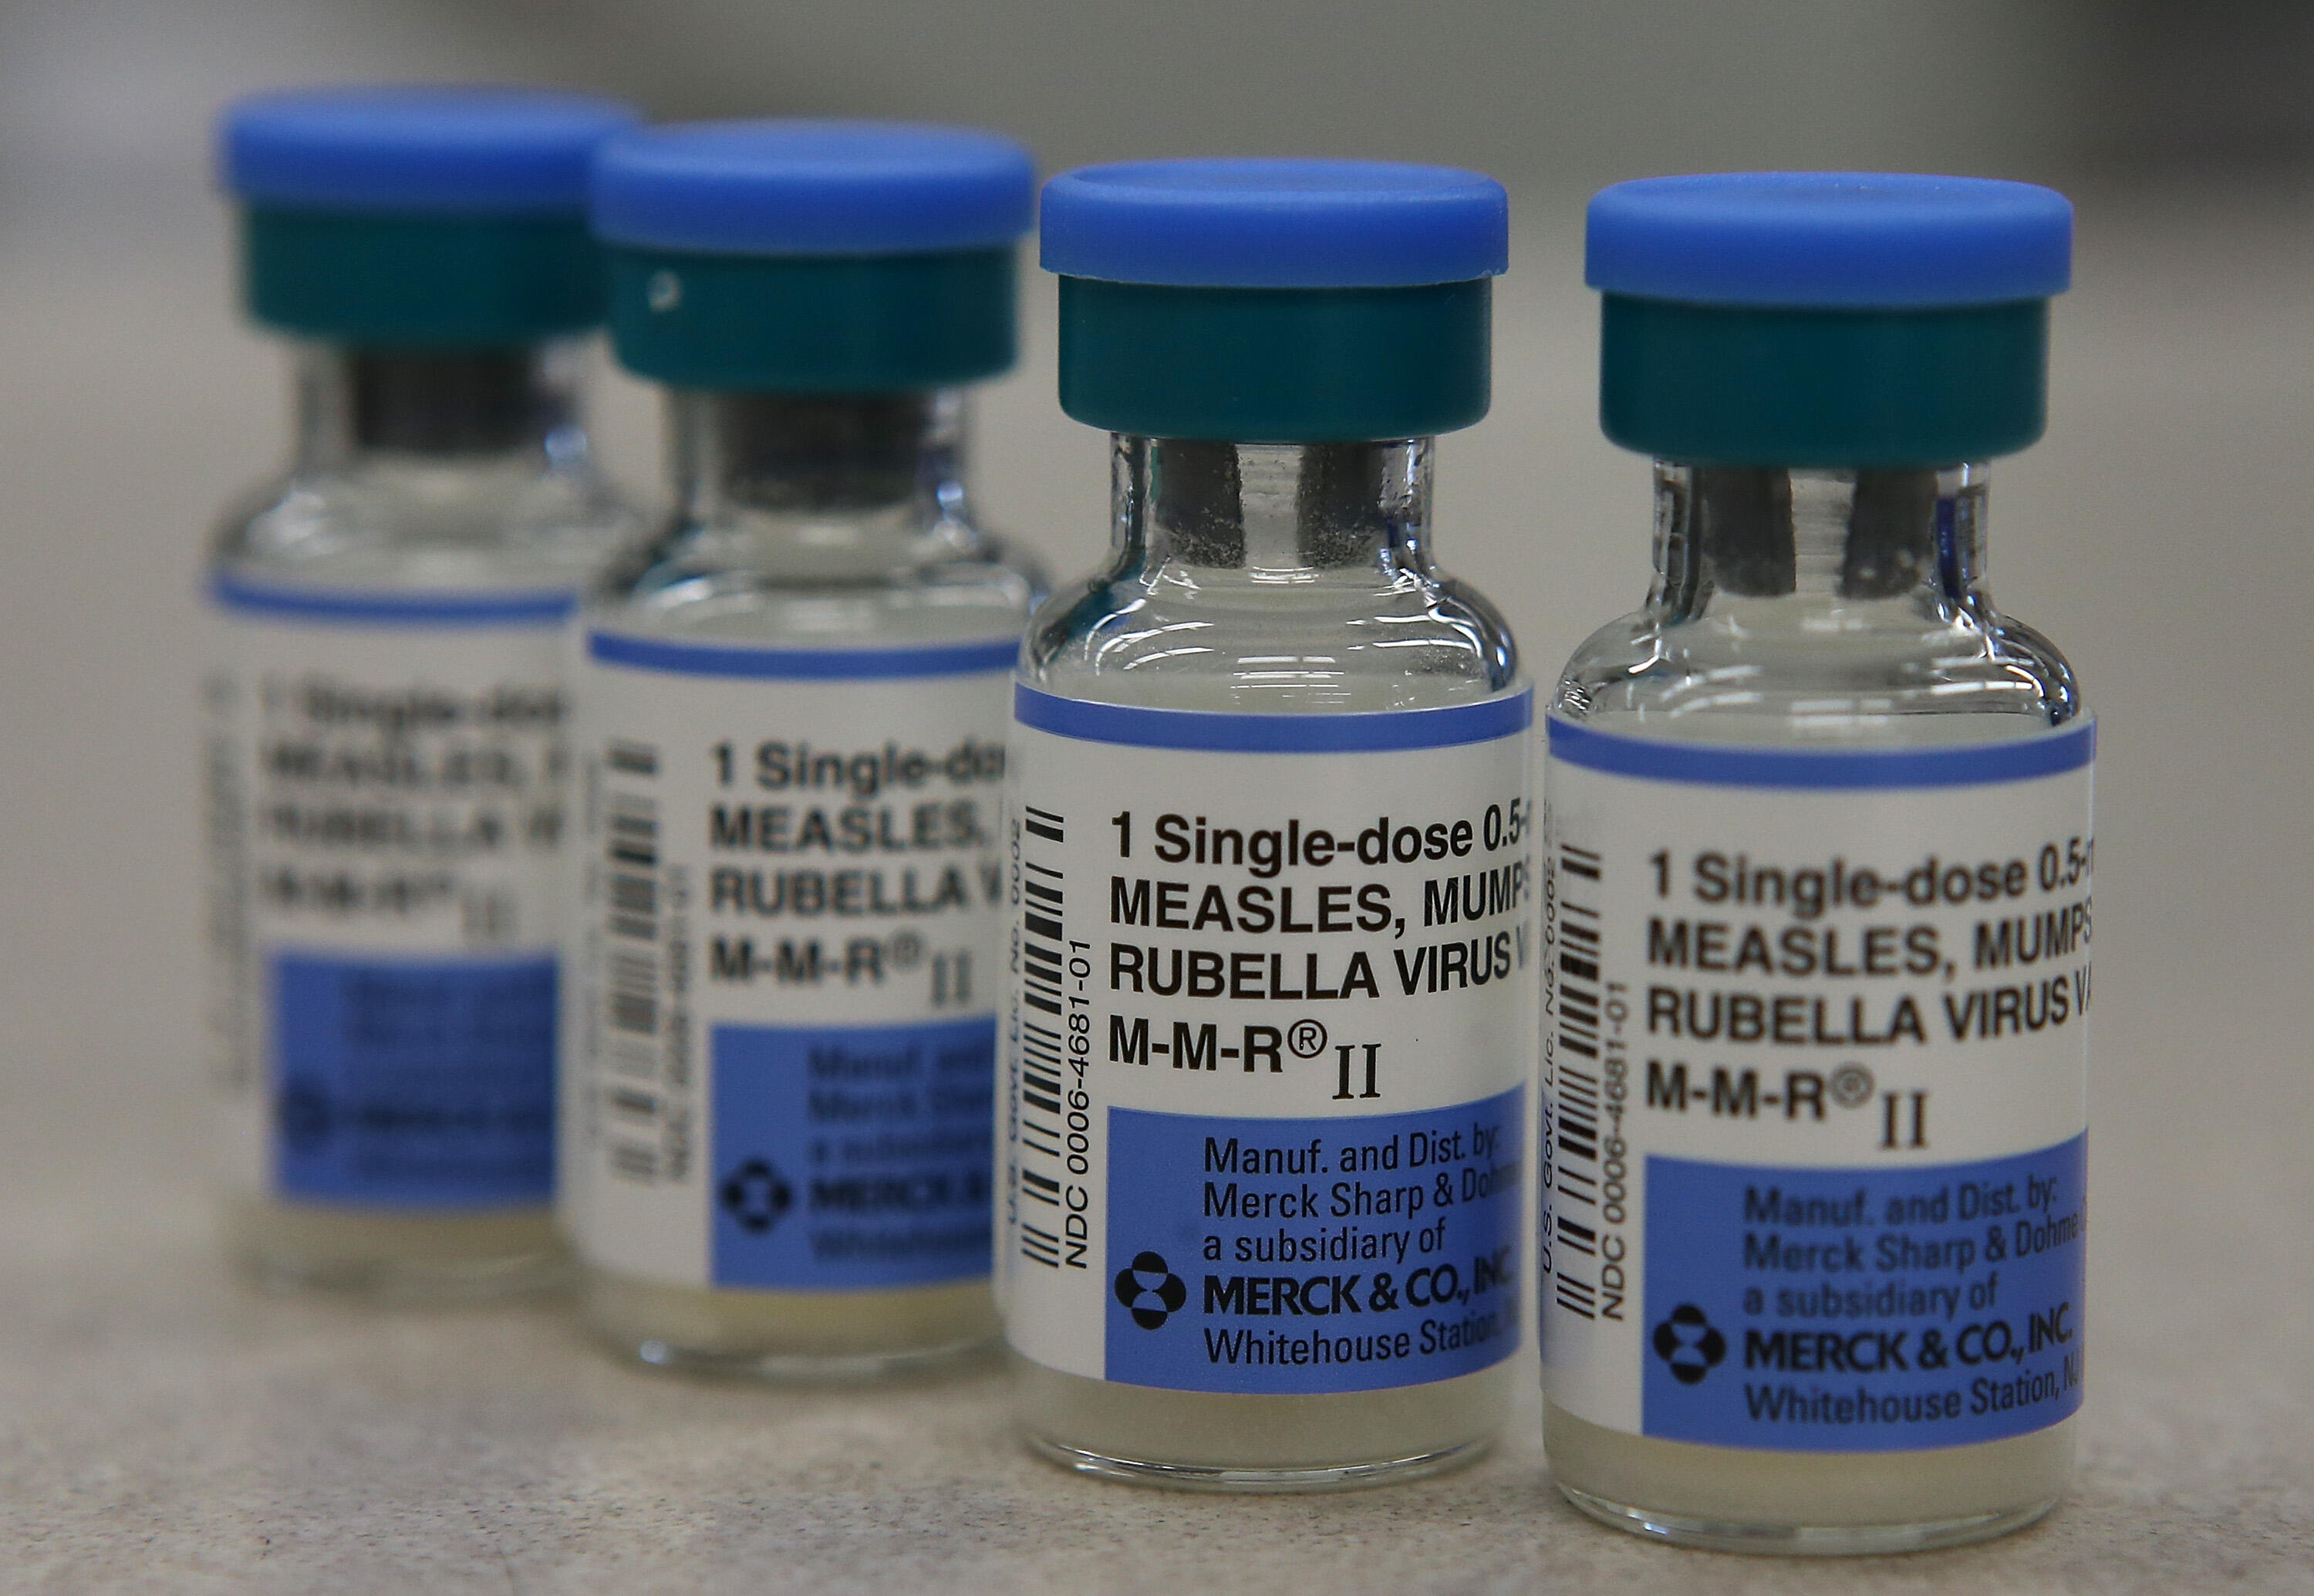 Possible Measles Outbreak In San Francisco! - Thumbnail Image